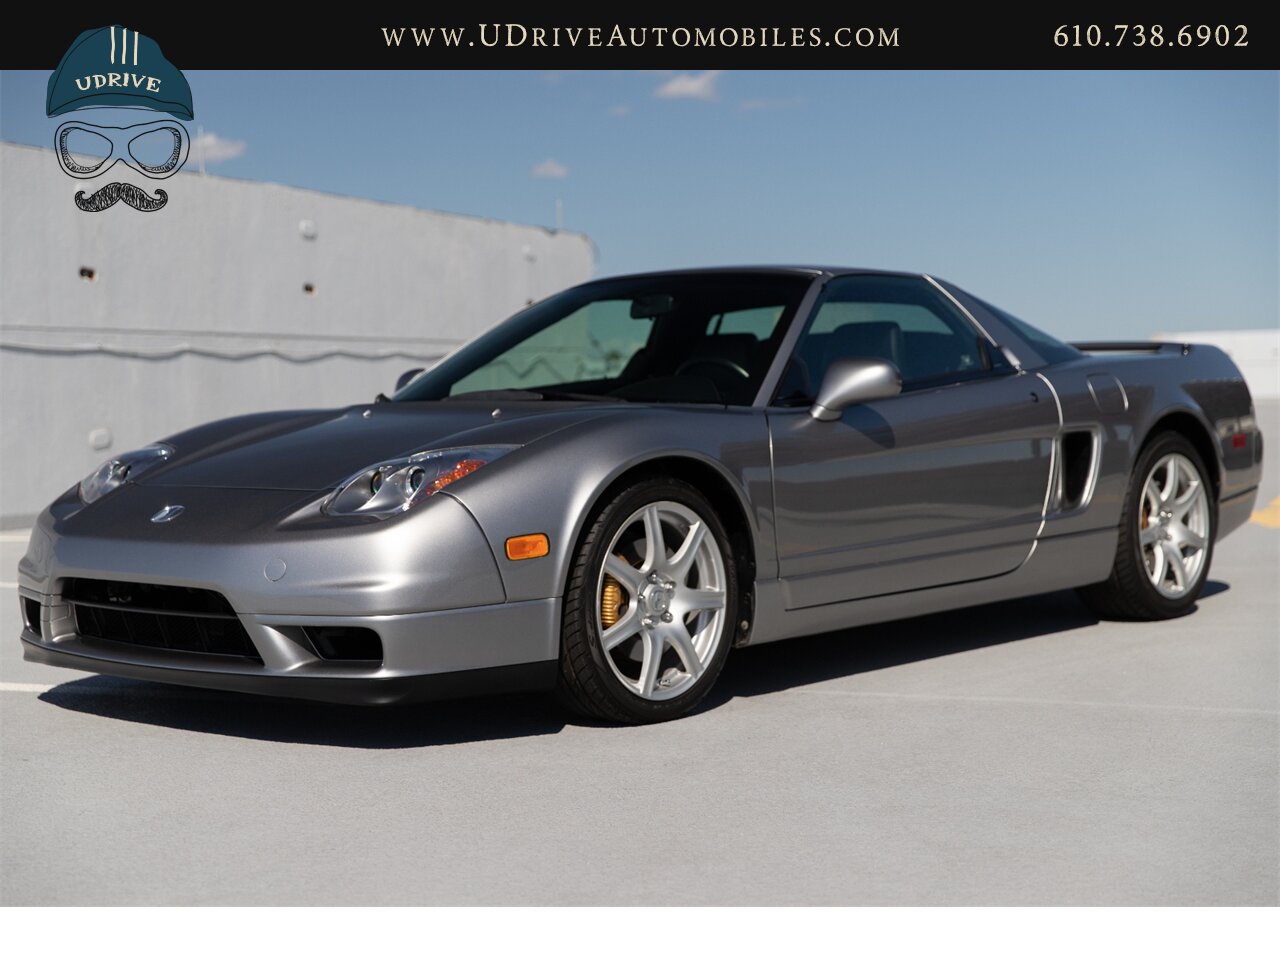 2002 Acura NSX NSX-T 9k Miles 6 Speed Manual Service History  Collector Grade - Photo 10 - West Chester, PA 19382